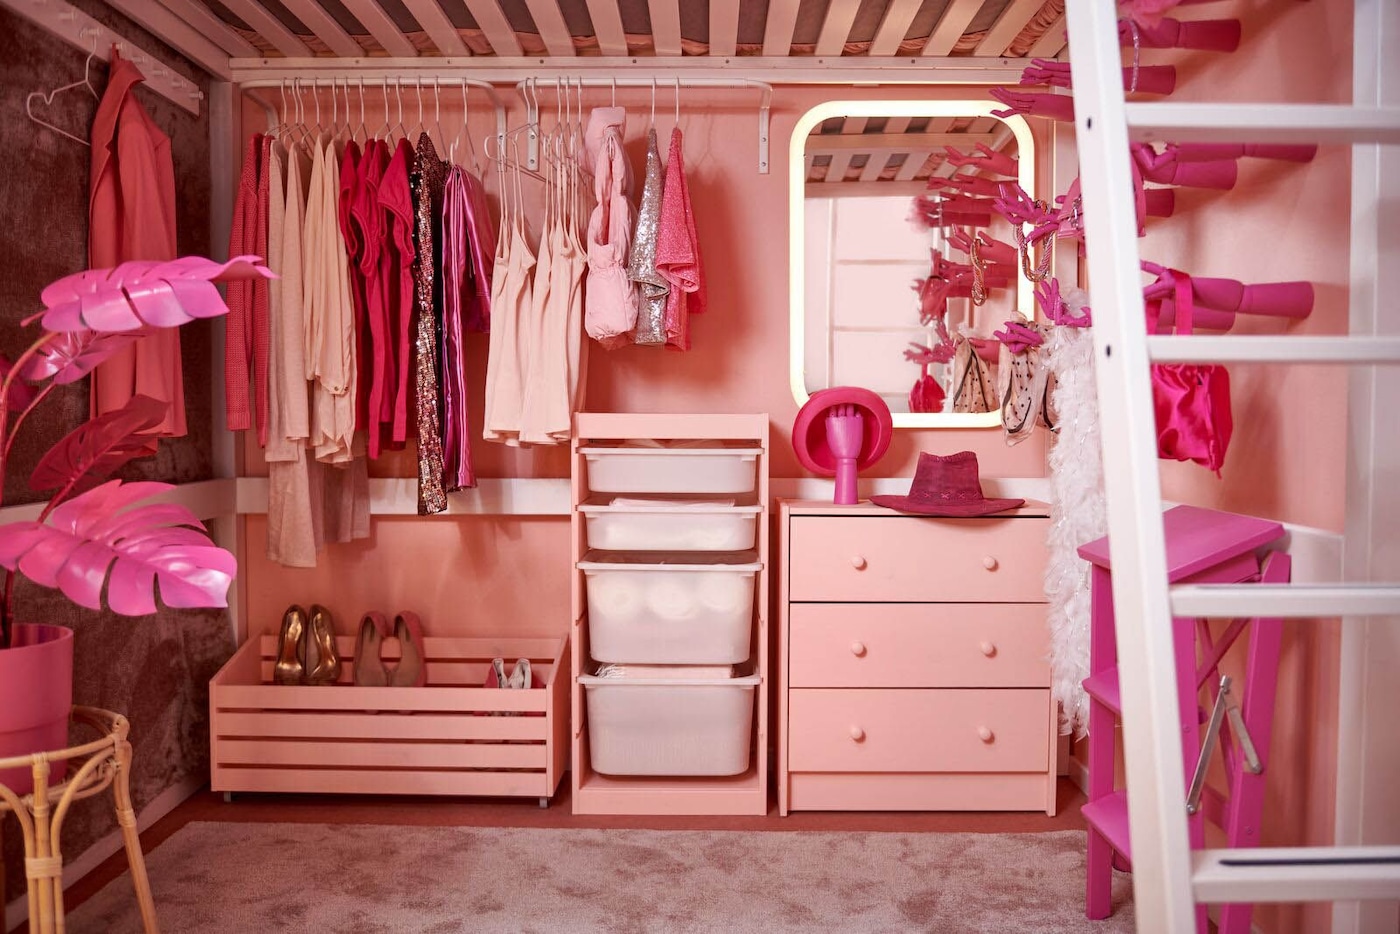 An all-pink bedroom with a pink dresser, loft bed, storage solutions and clothing, all in varying shades of pink.